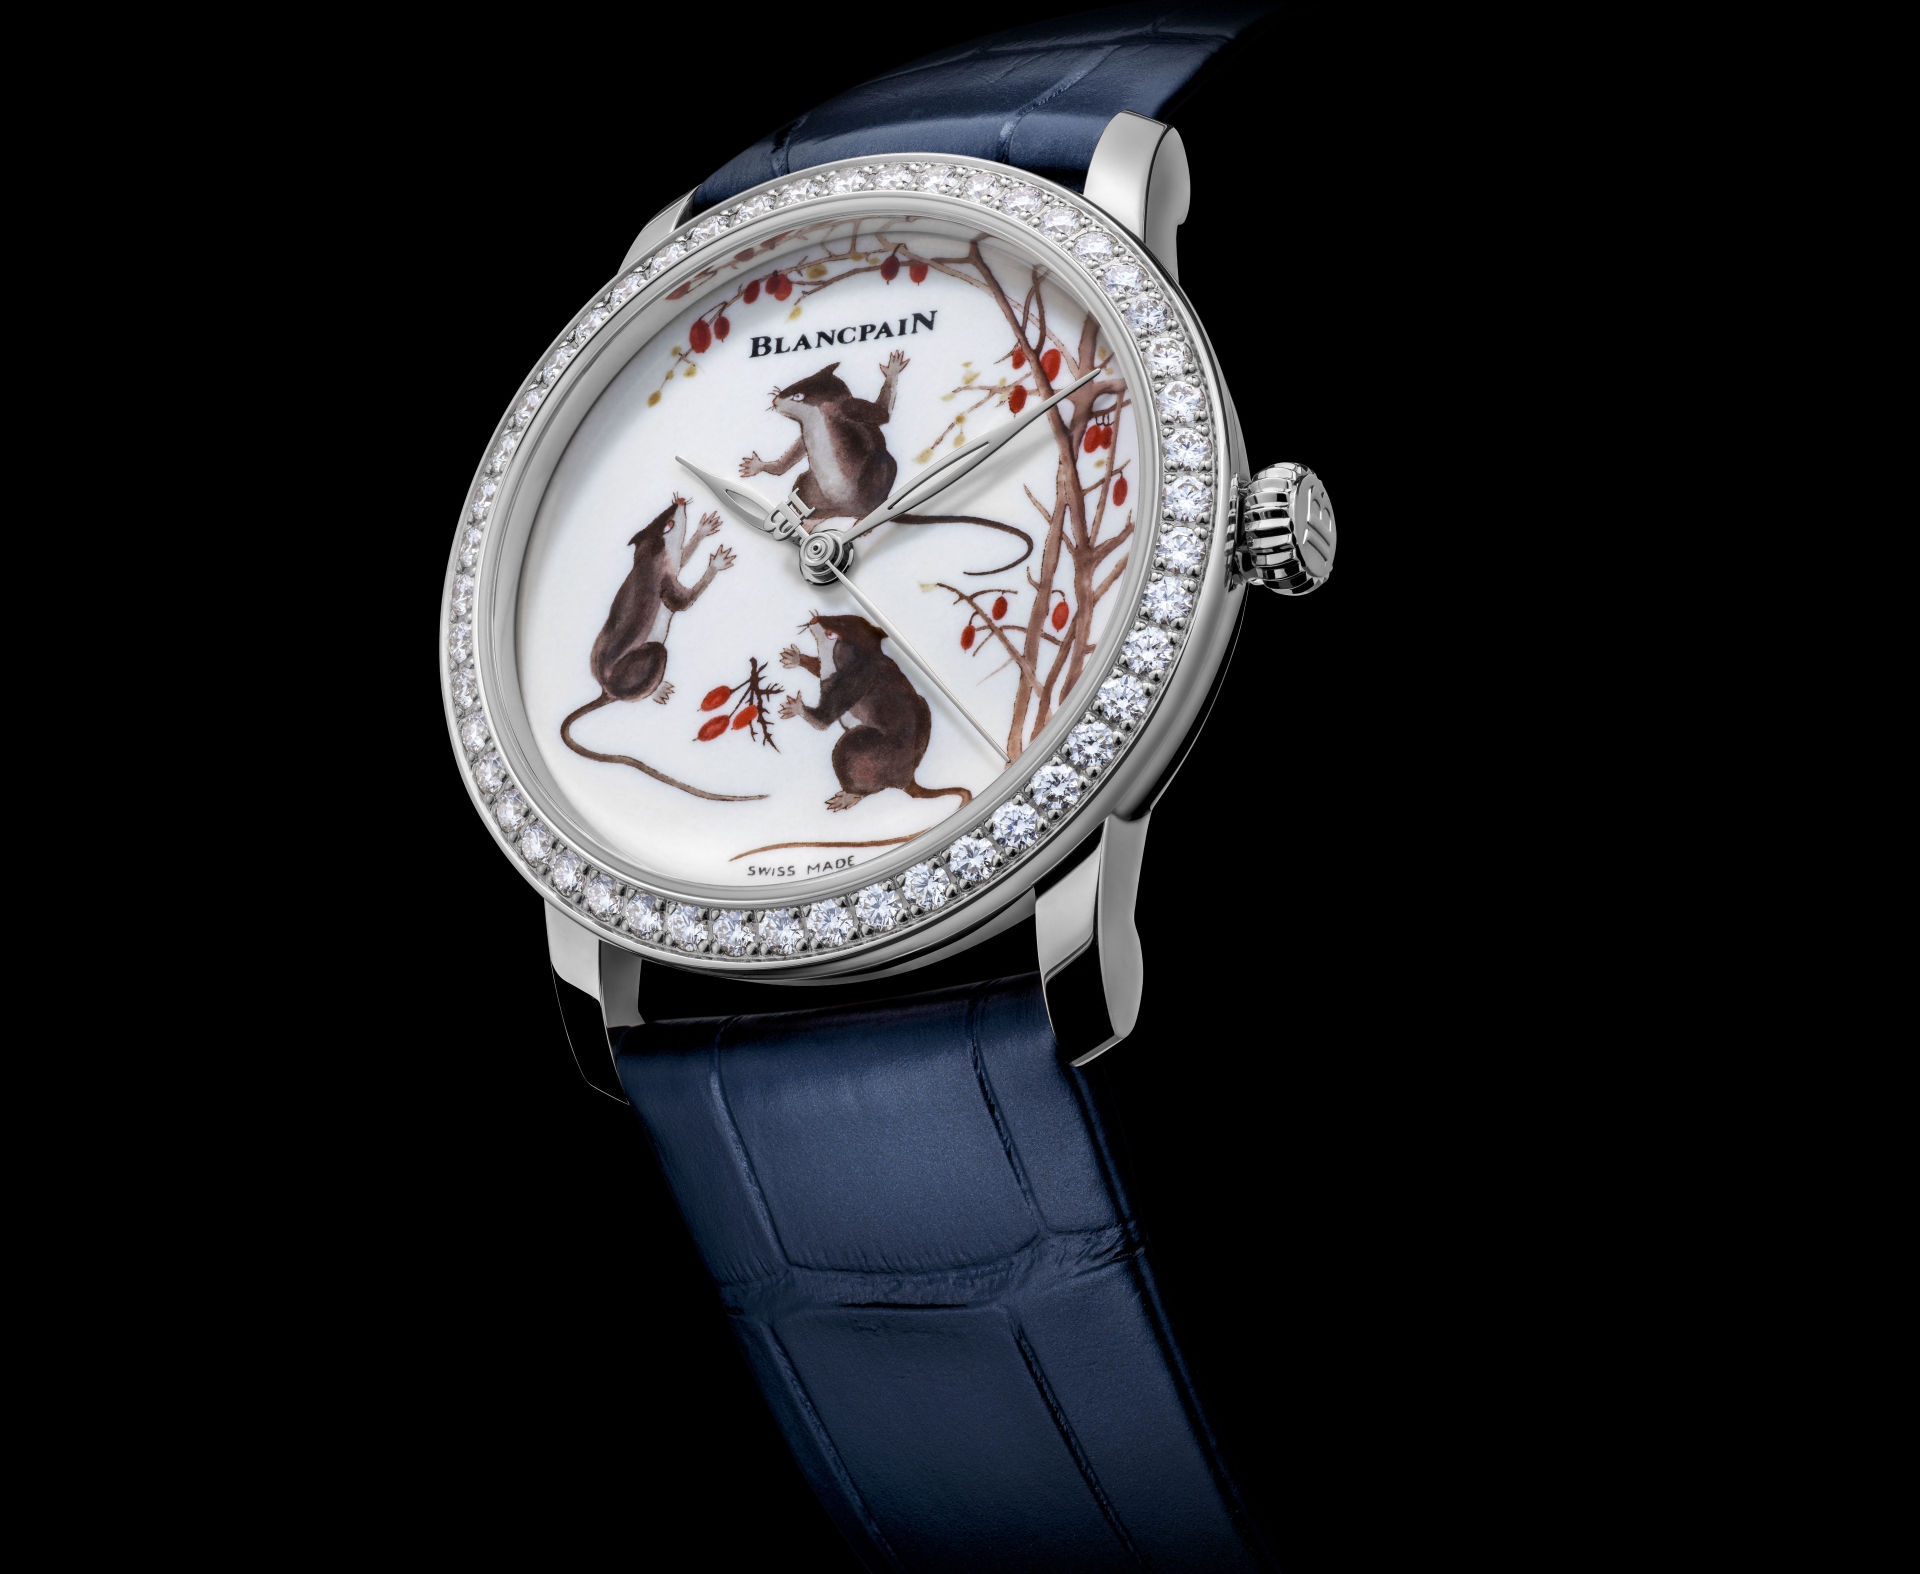 Blancpain celebrates the year of the rat with its first ever porcelain dial